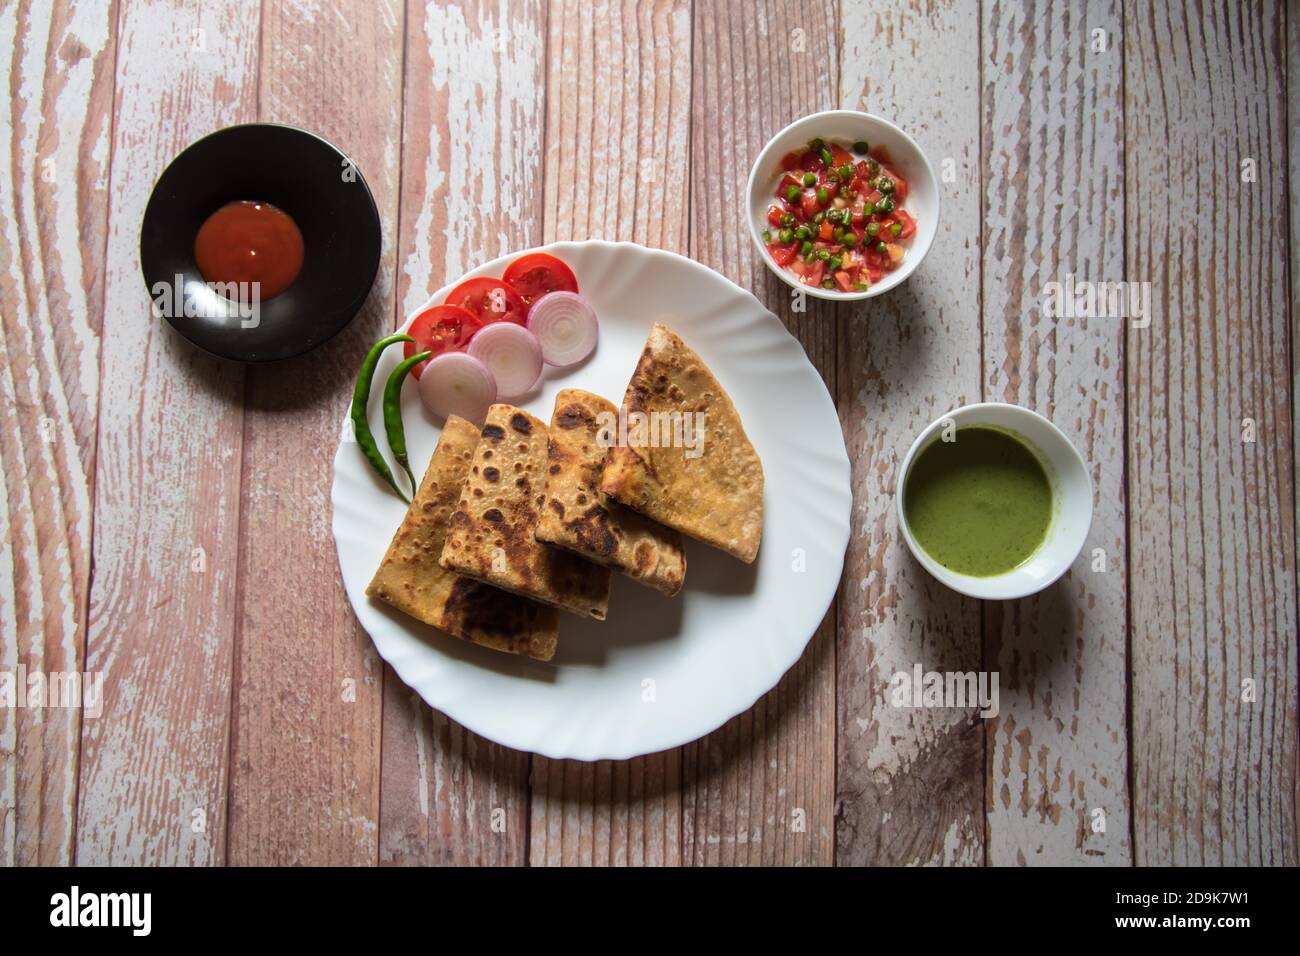 View from above of alu paratha along with breakfast ingredients Stock Photo